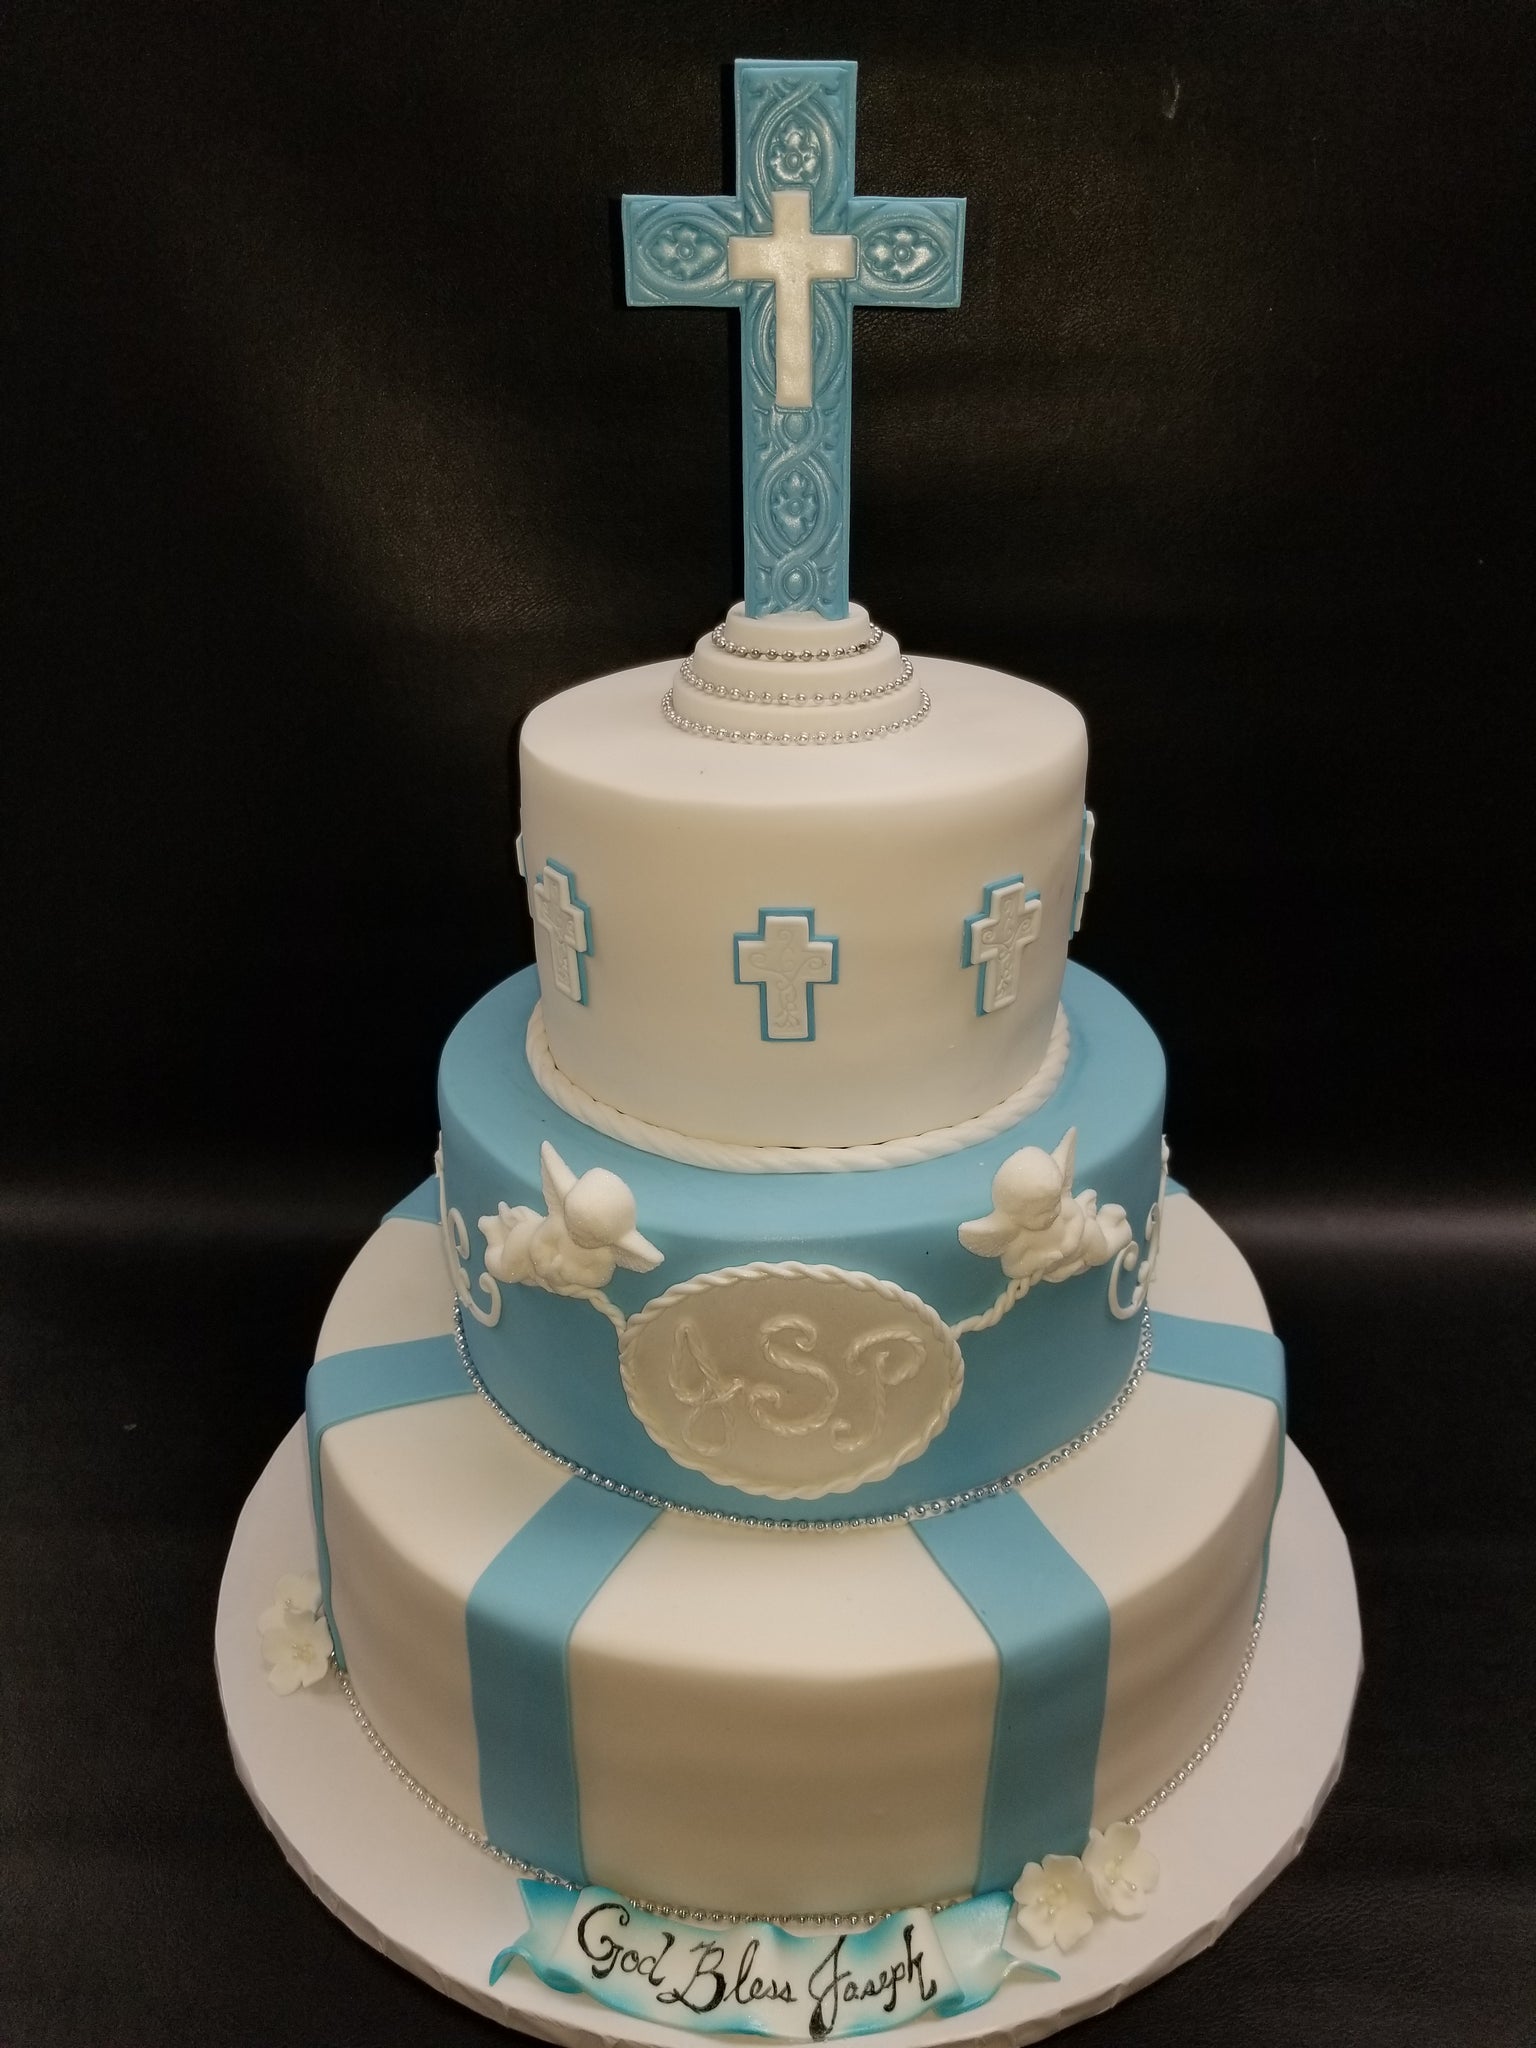 Marina's cake world - What a lovely message for a christening cake. I wish  the best to the little one. #christeningcake #christening #baptism  #baptismcake #christian #marinascakeworld #london #canarywharf #isleofdogs  #londoncakes #eastlondoncakes ...